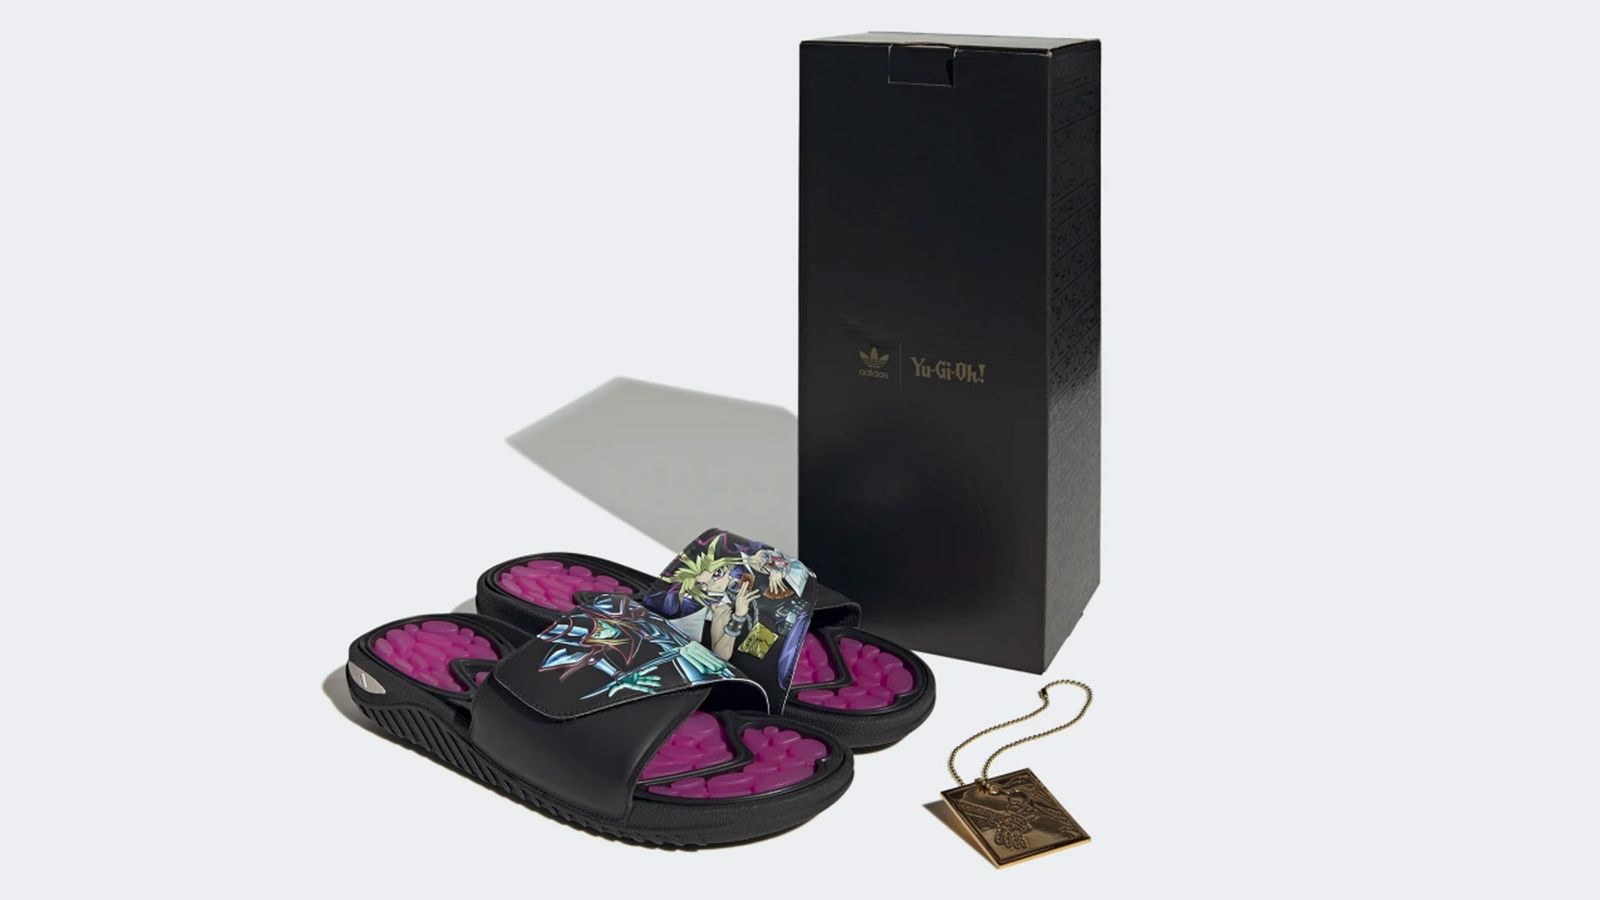 Yu-Gi-Oh! x adidas Reptossage Slides product image of black and purple sliders with graphics of Dark Magician and Yugi on top next to their black custom box.